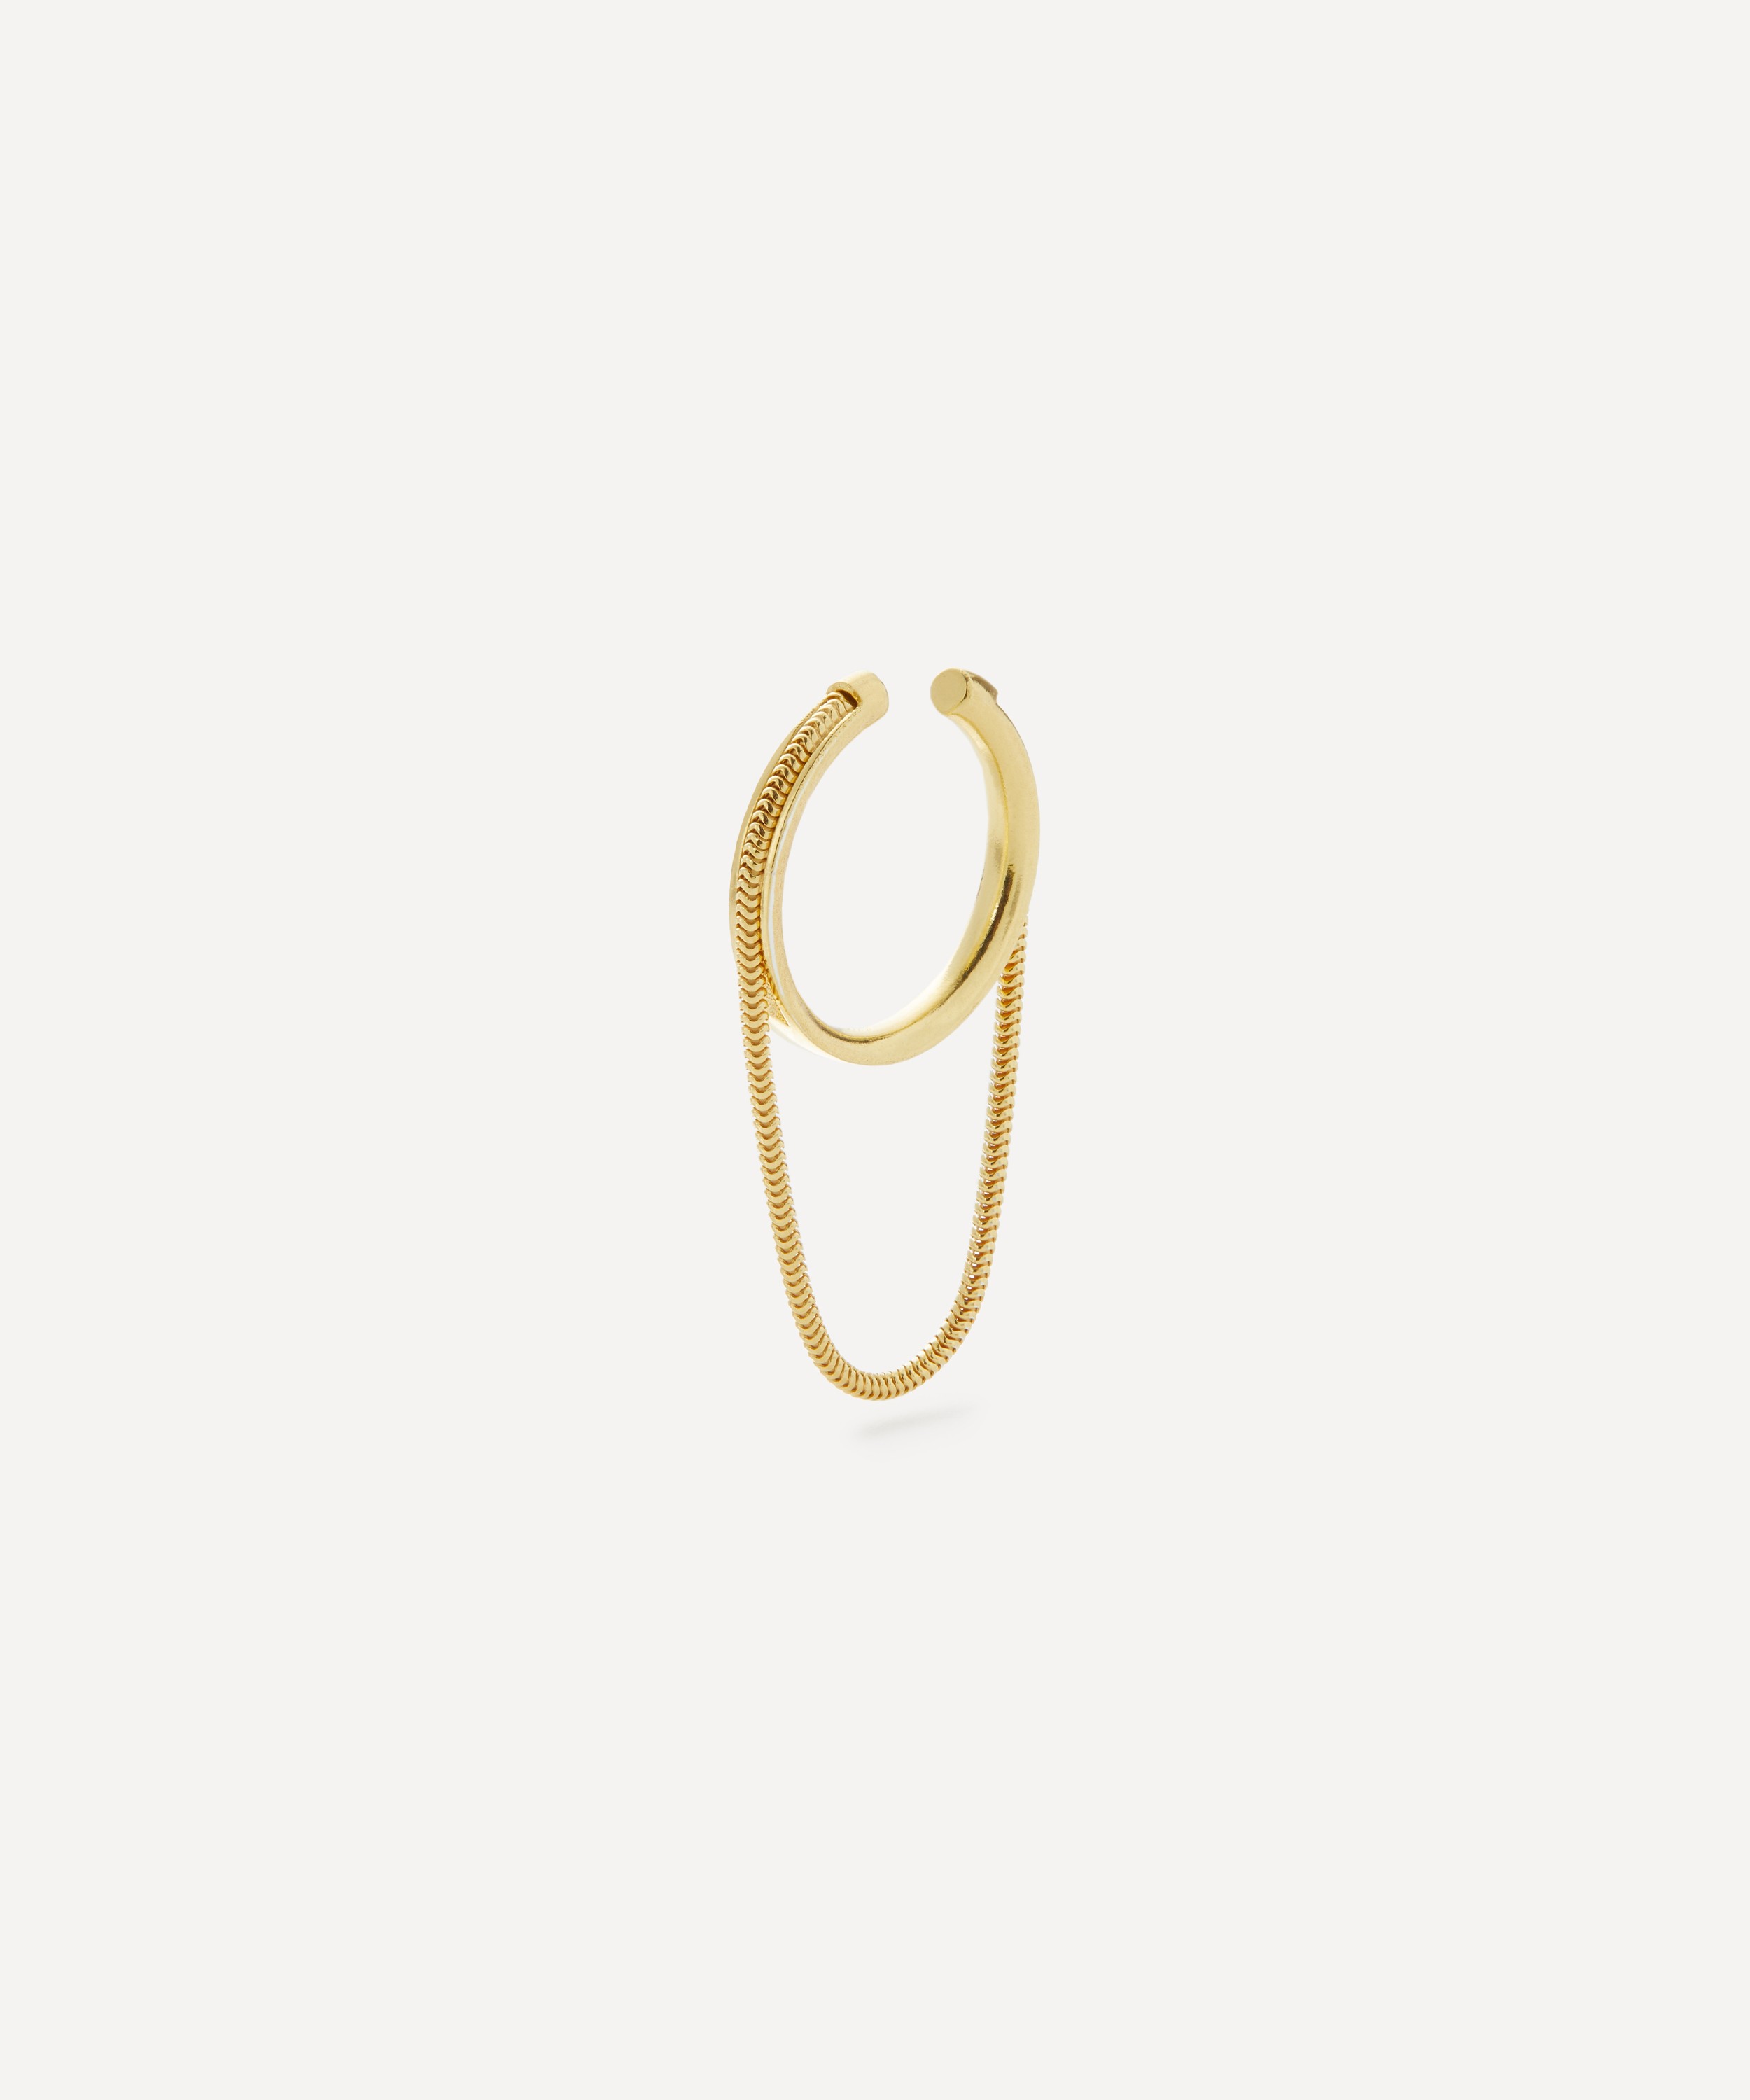 Maggoosh - Gold-Plated Twinkler Ear Cuff